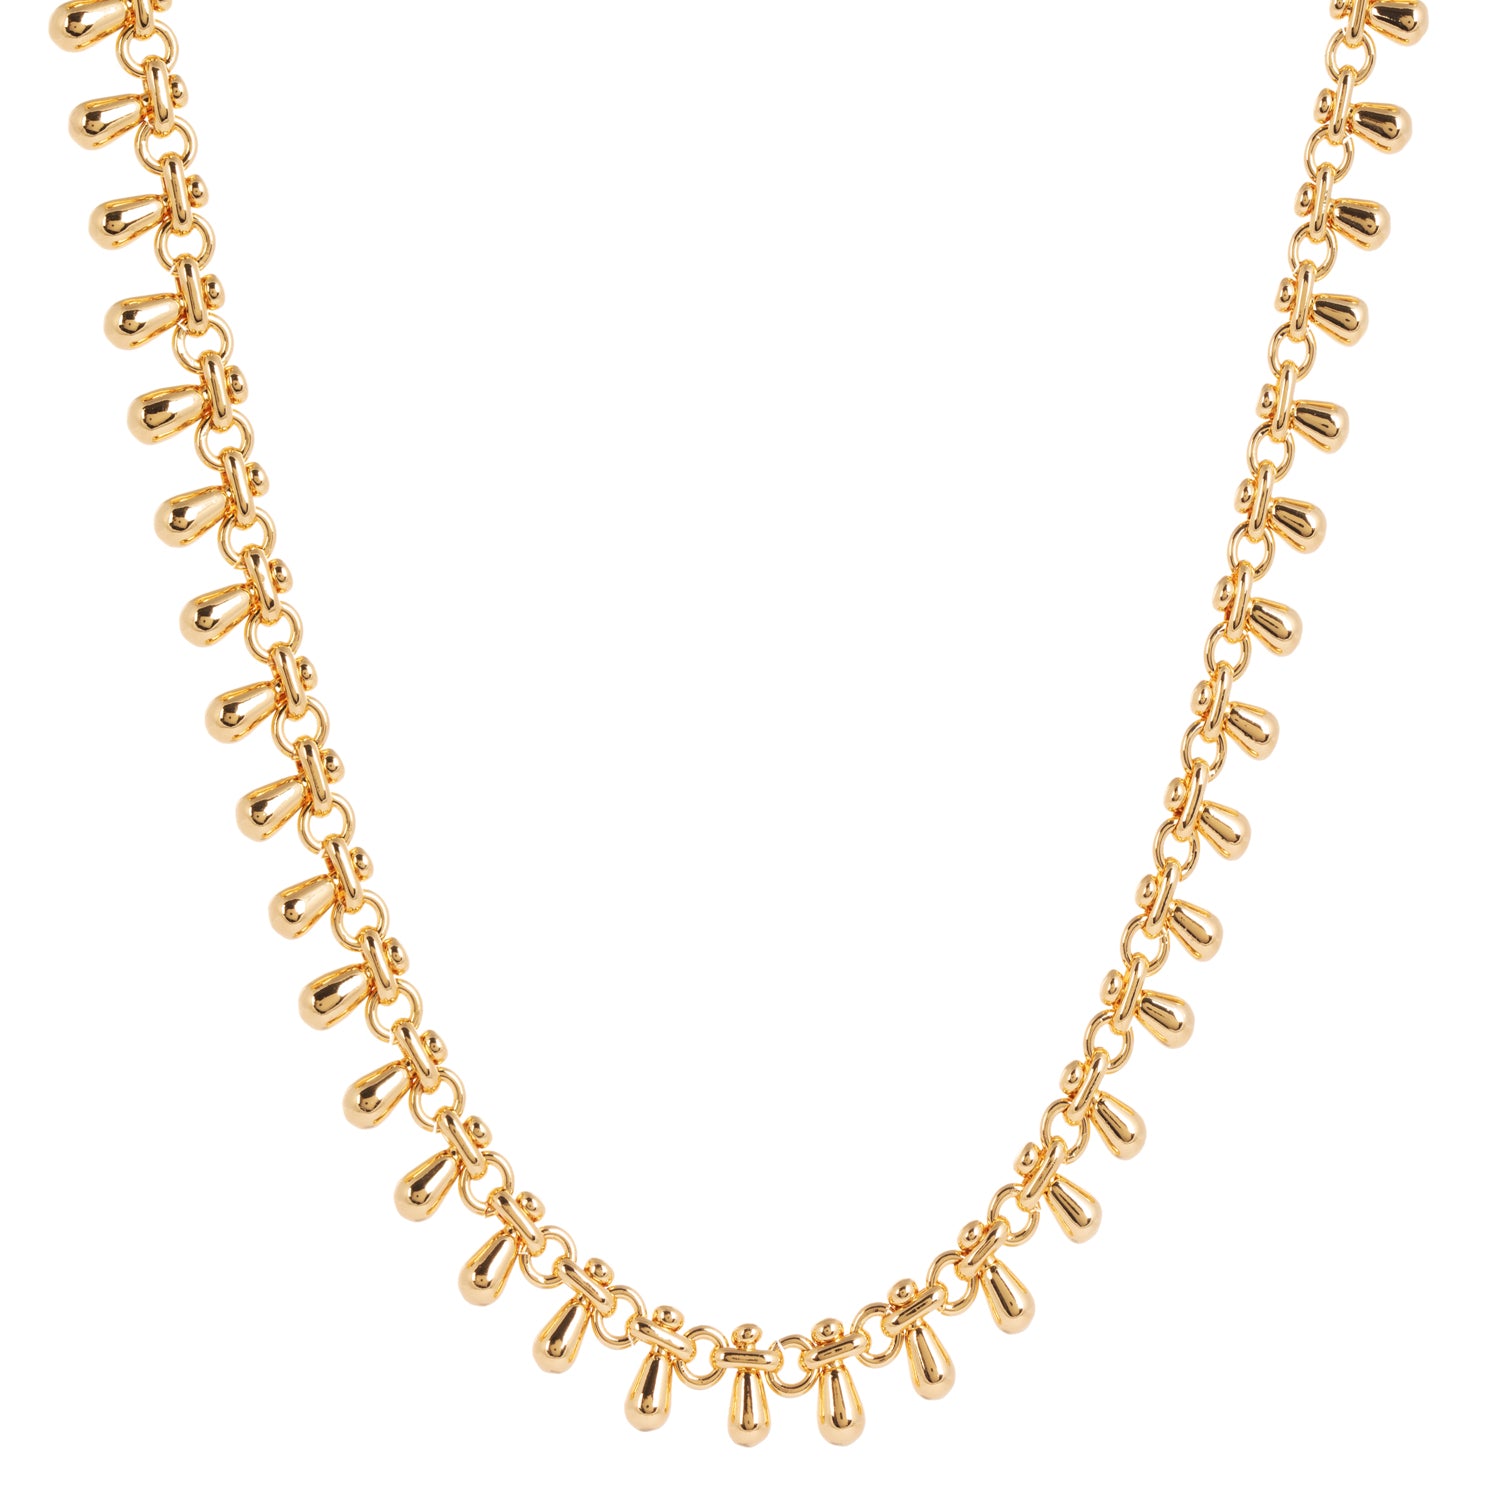 Katia Gold Chain Necklace With Teardrop Tassels